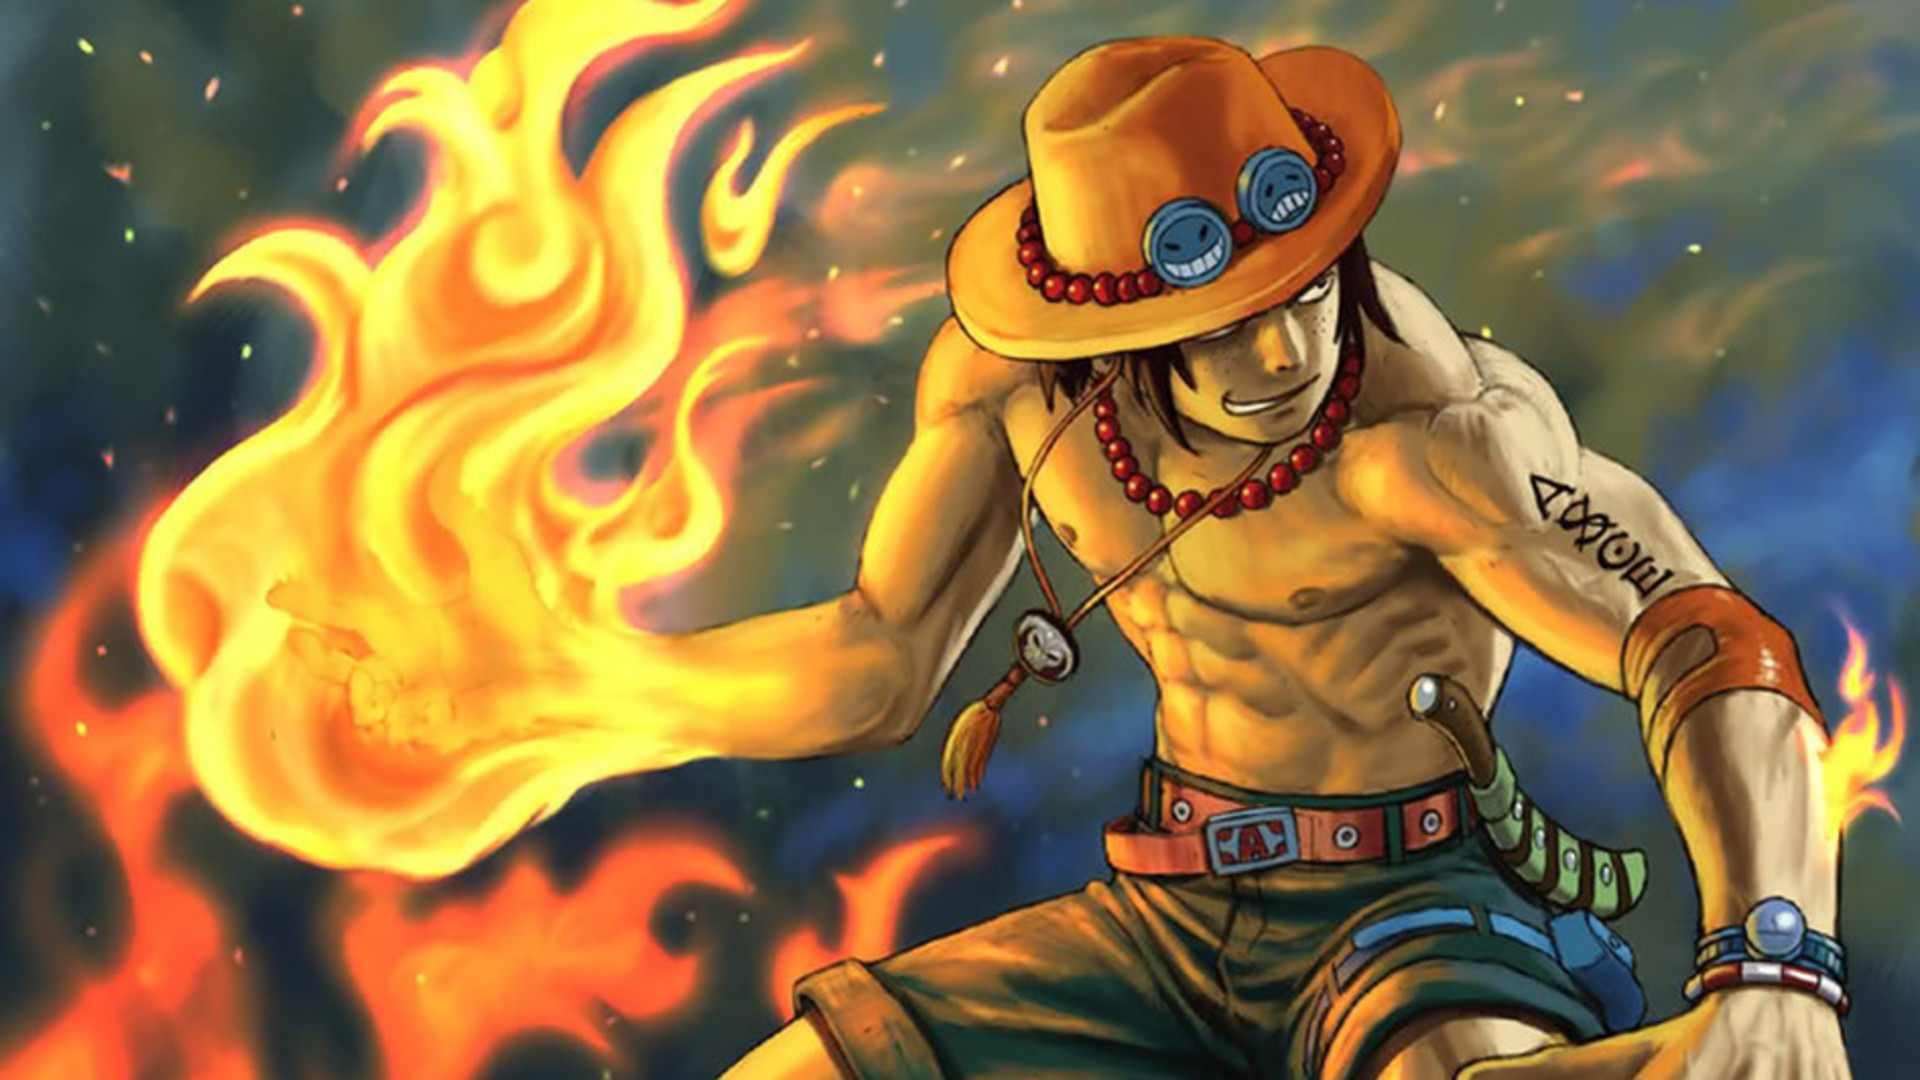 portgas d ace, anime, one piece phone wallpaper